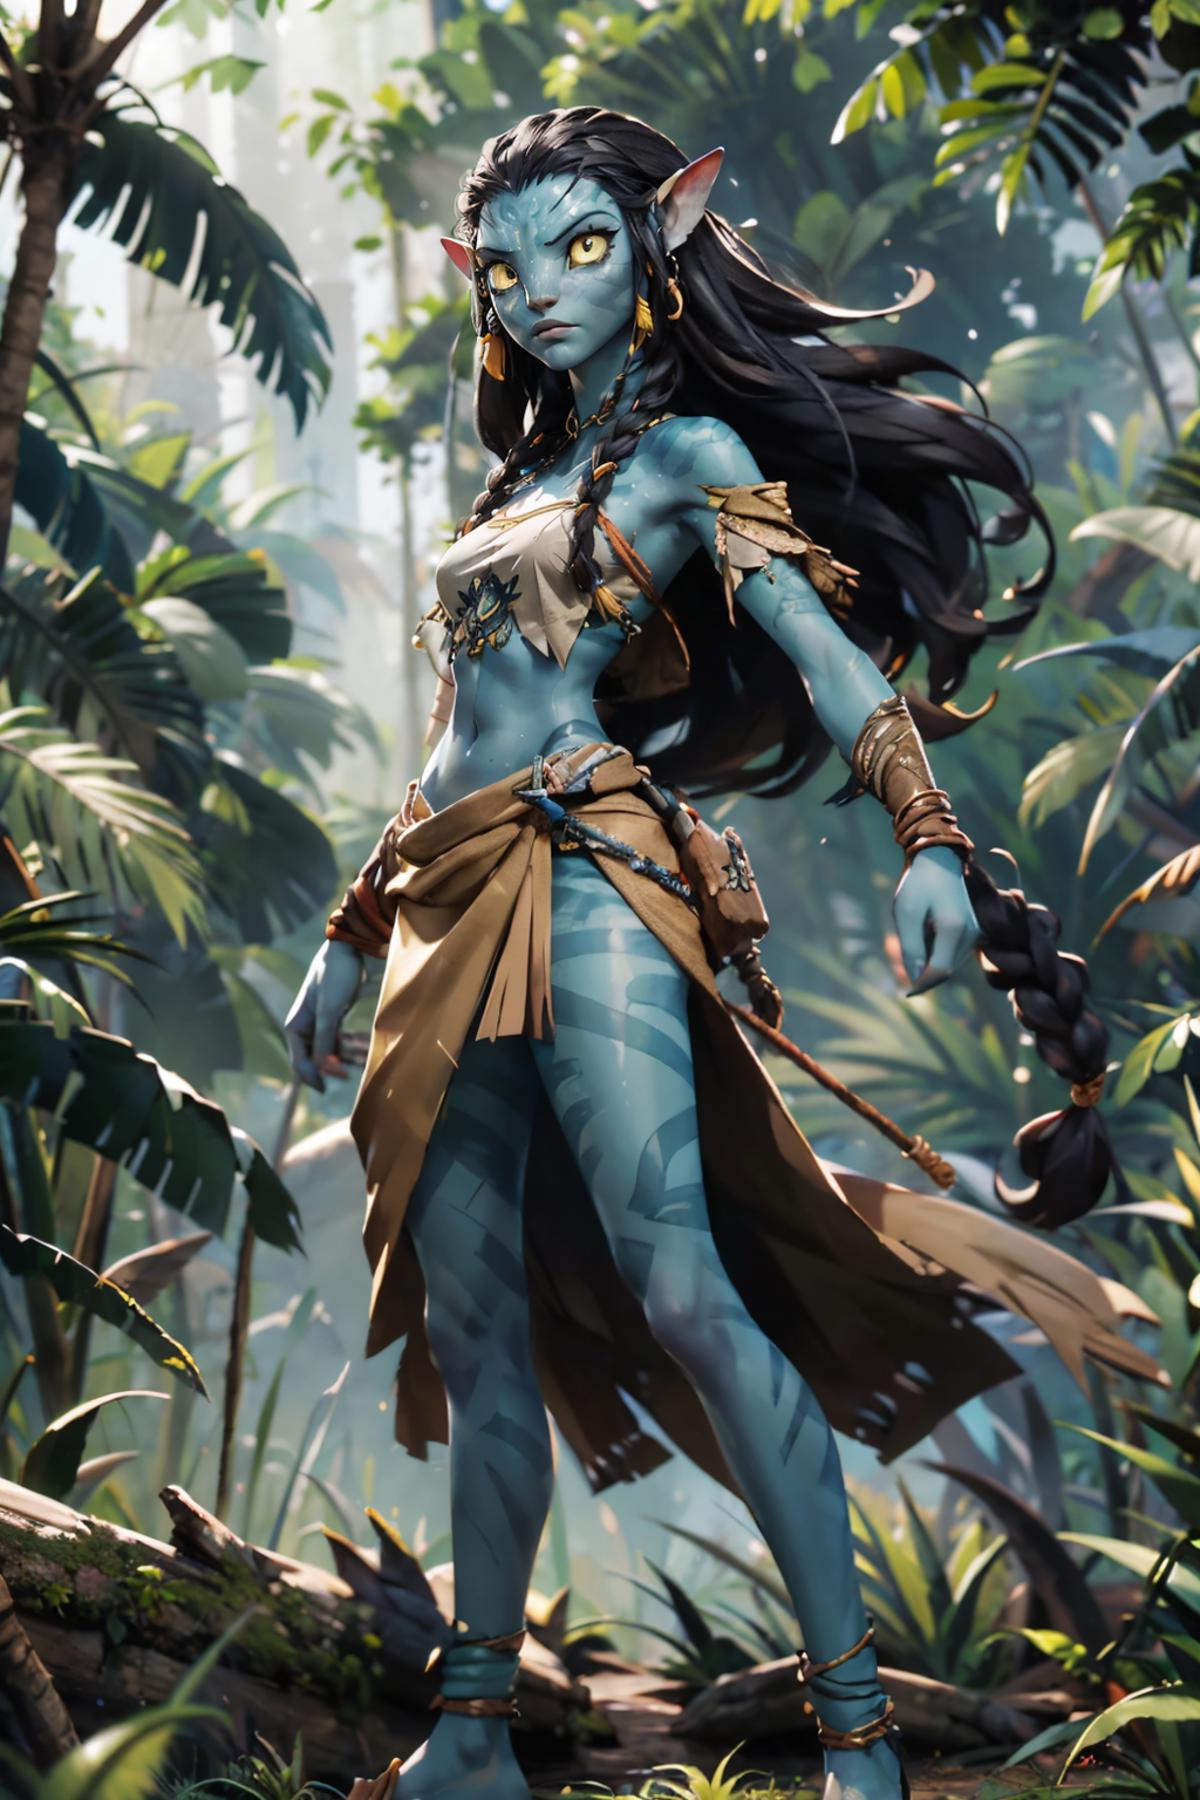 A blue-skinned woman with black hair and a dress stands in a jungle.